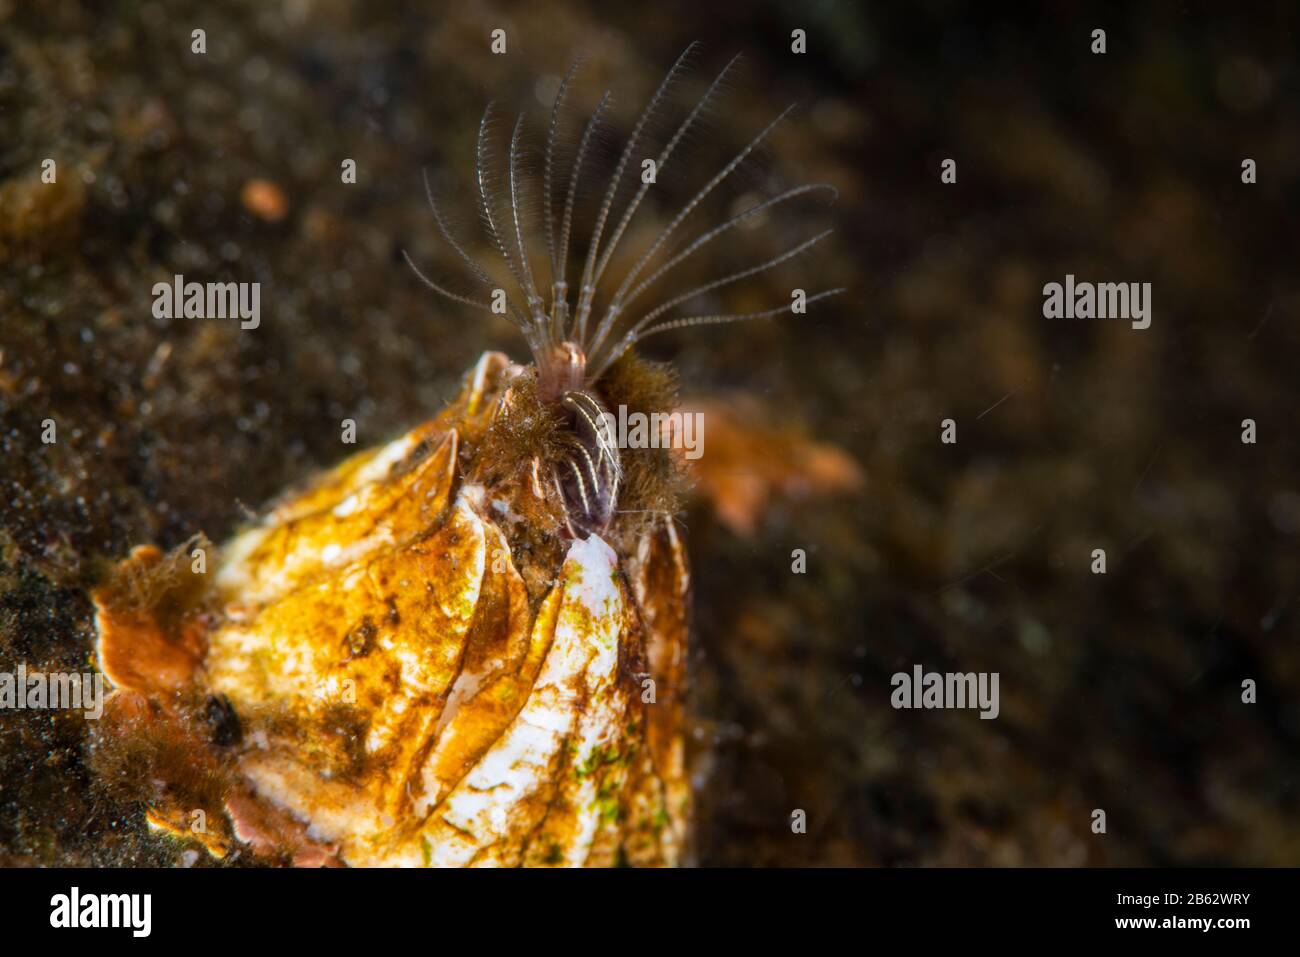 Barnacles filtering plankton from the water. Stock Photo